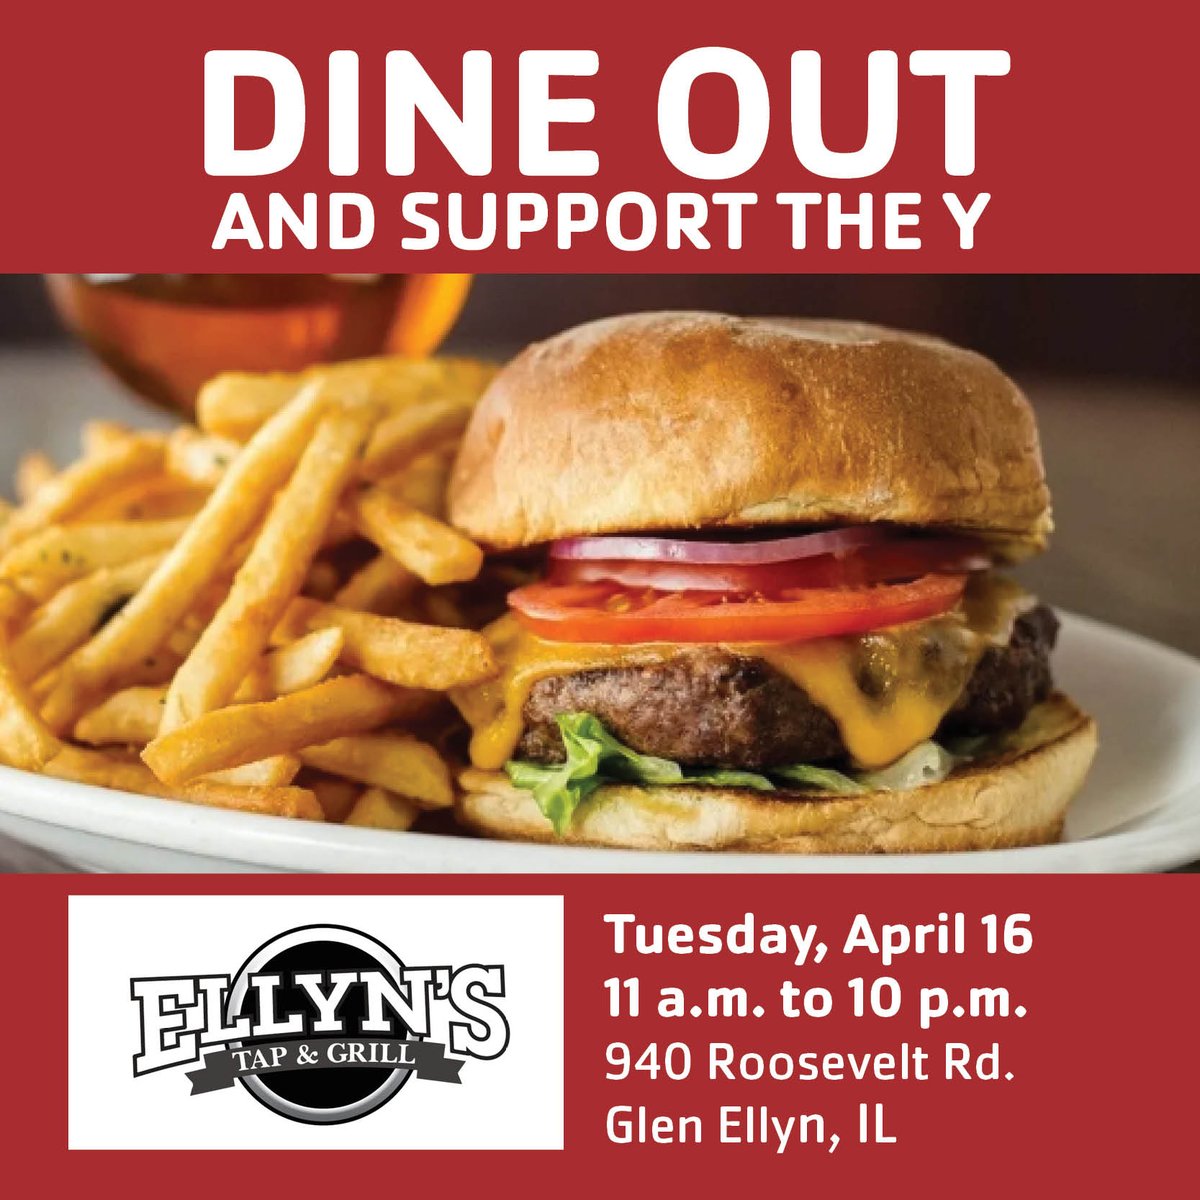 Satisfy your taste buds and support a good cause at the same time. Mention the Y or present the flyer when you dine in or carry out on Tuesday, April 16 and @Ellyns_Tap will donate 20% of sales to the B.R. Ryall YMCA. Browse the menu ellyns.com